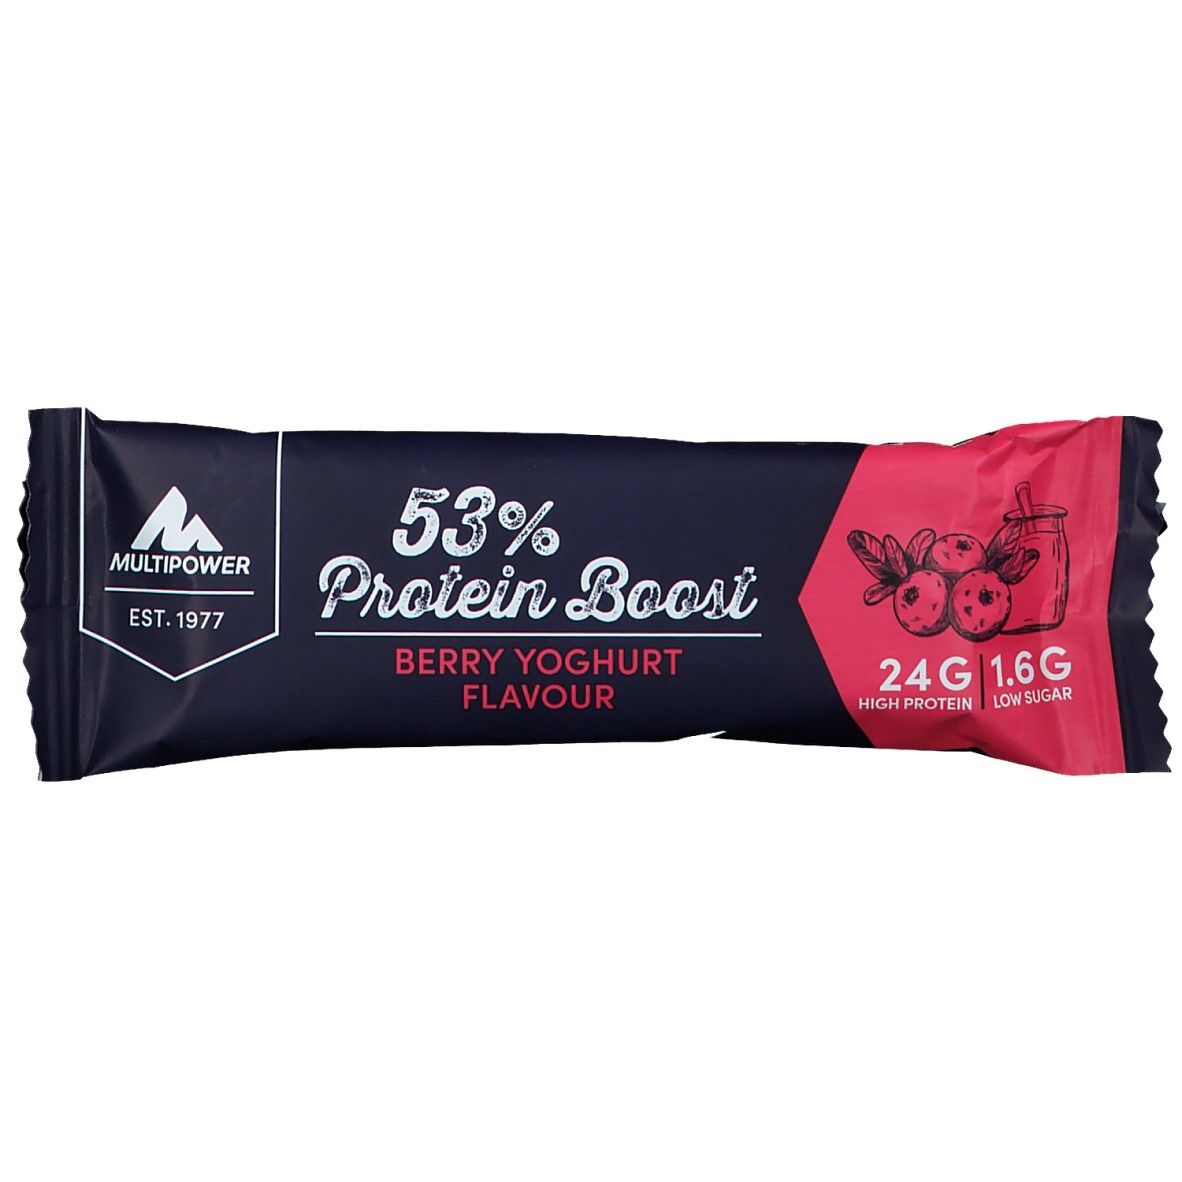 Image of Multipower 53 % Protein Boost Riegel Berry Yoghurt